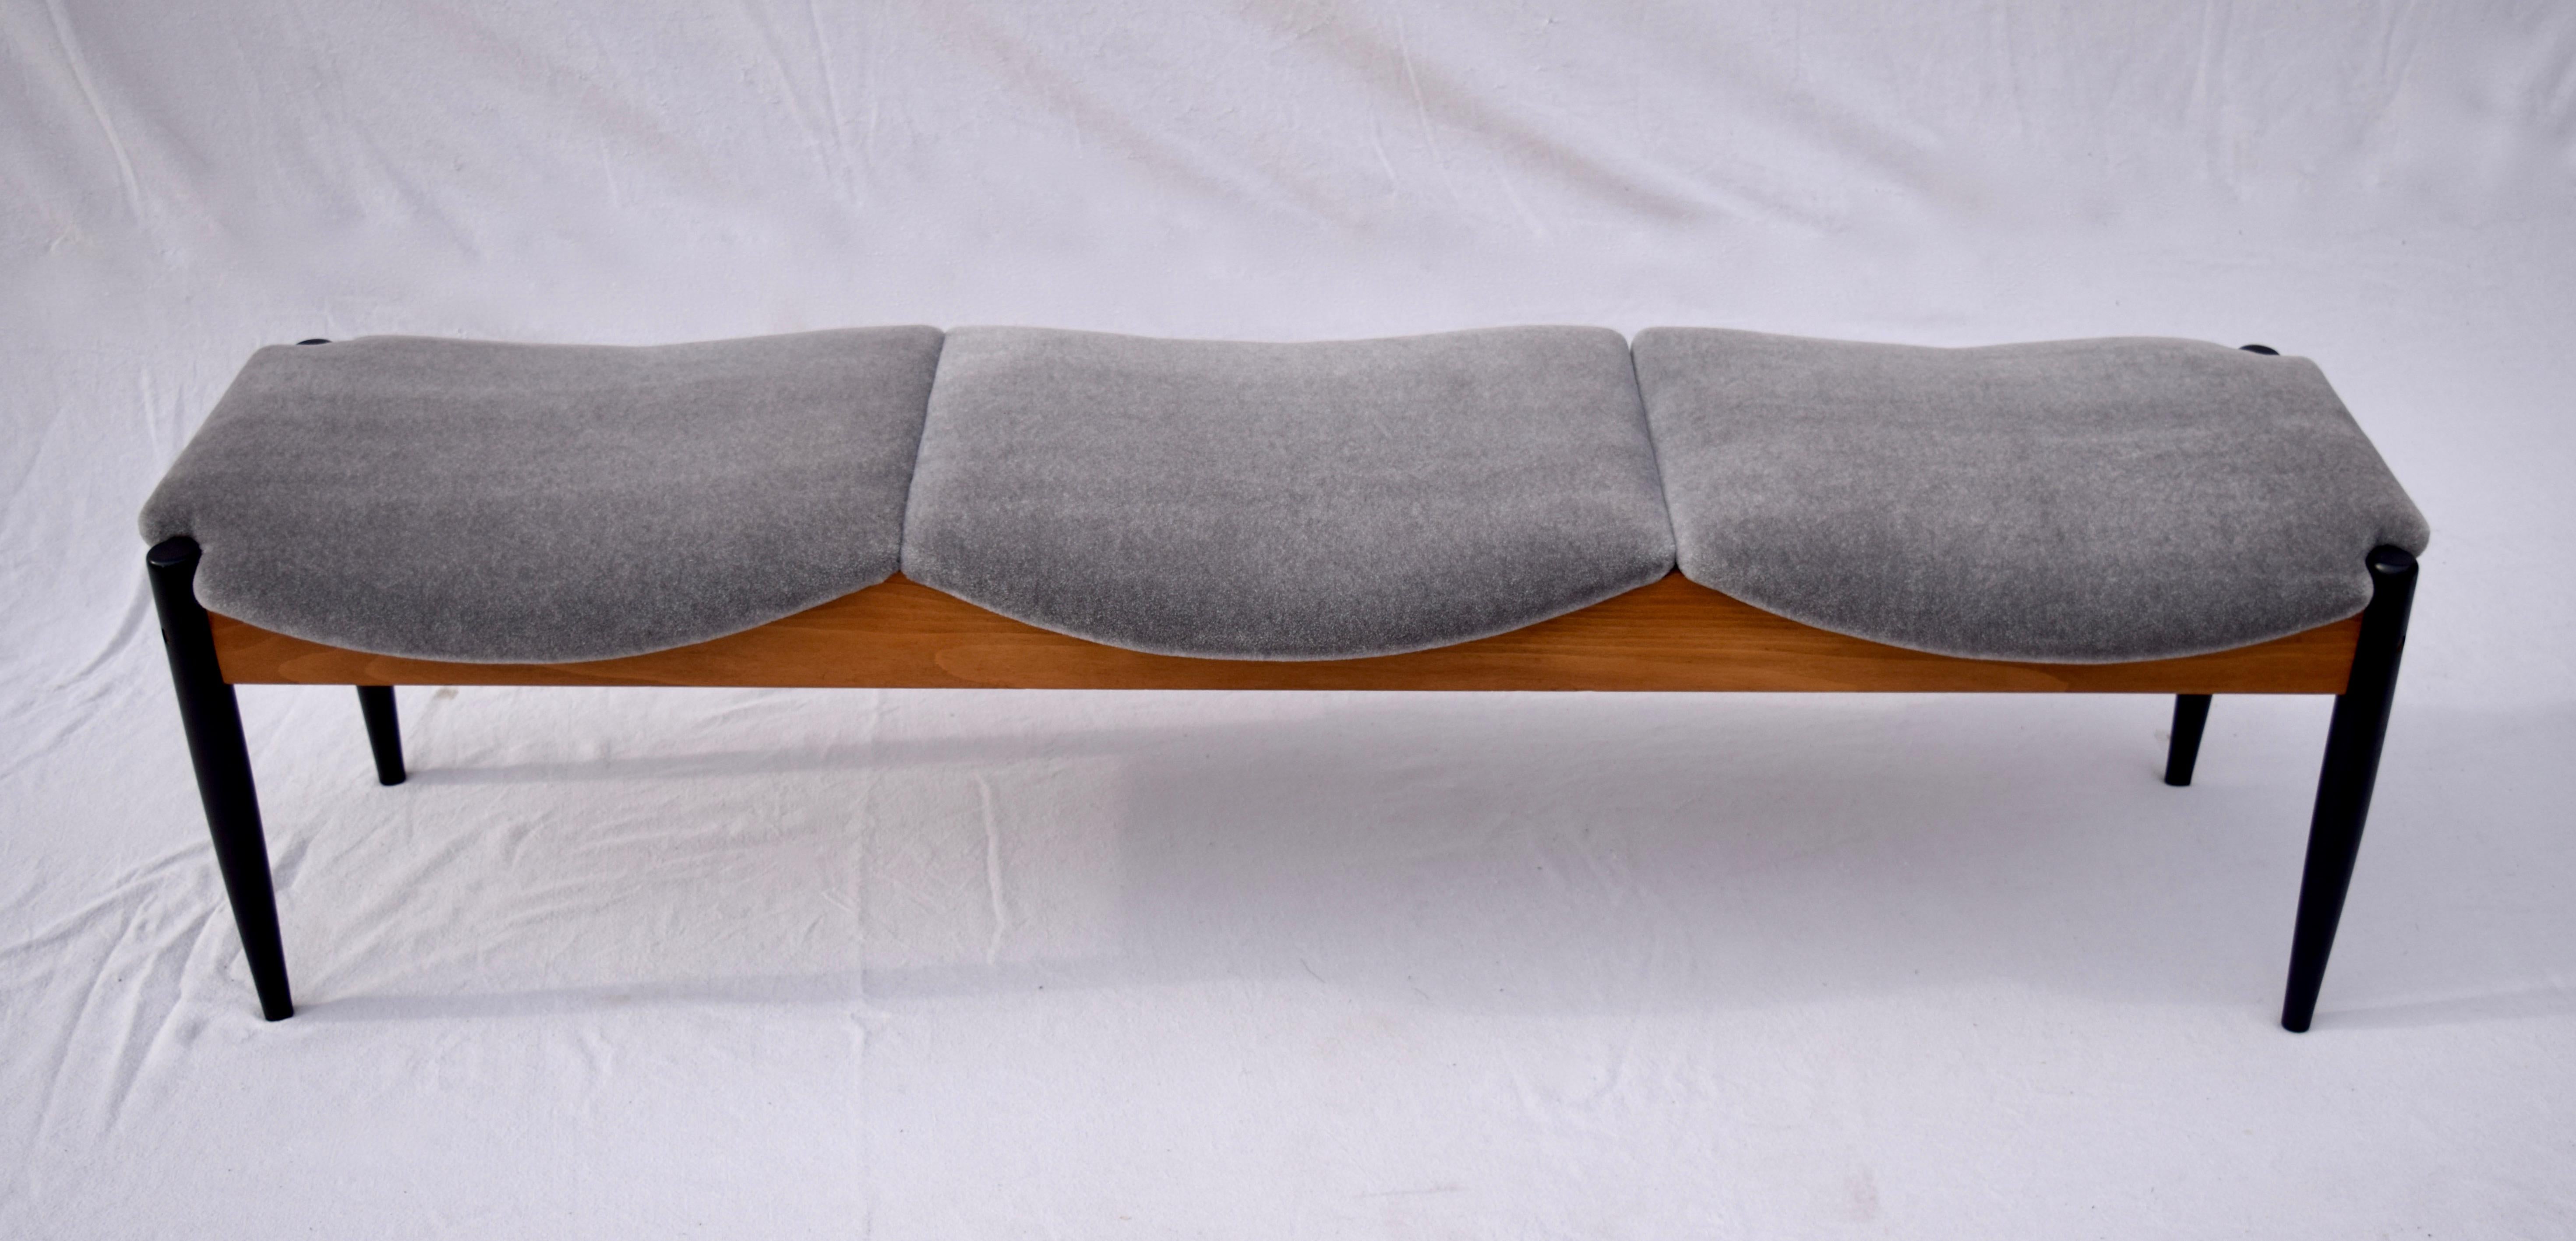 Desirable Midcentury three seat bench by John Stuart of walnut structure with beautifully maintained original finish. Newly re-upholstered in plush grey Mohair.